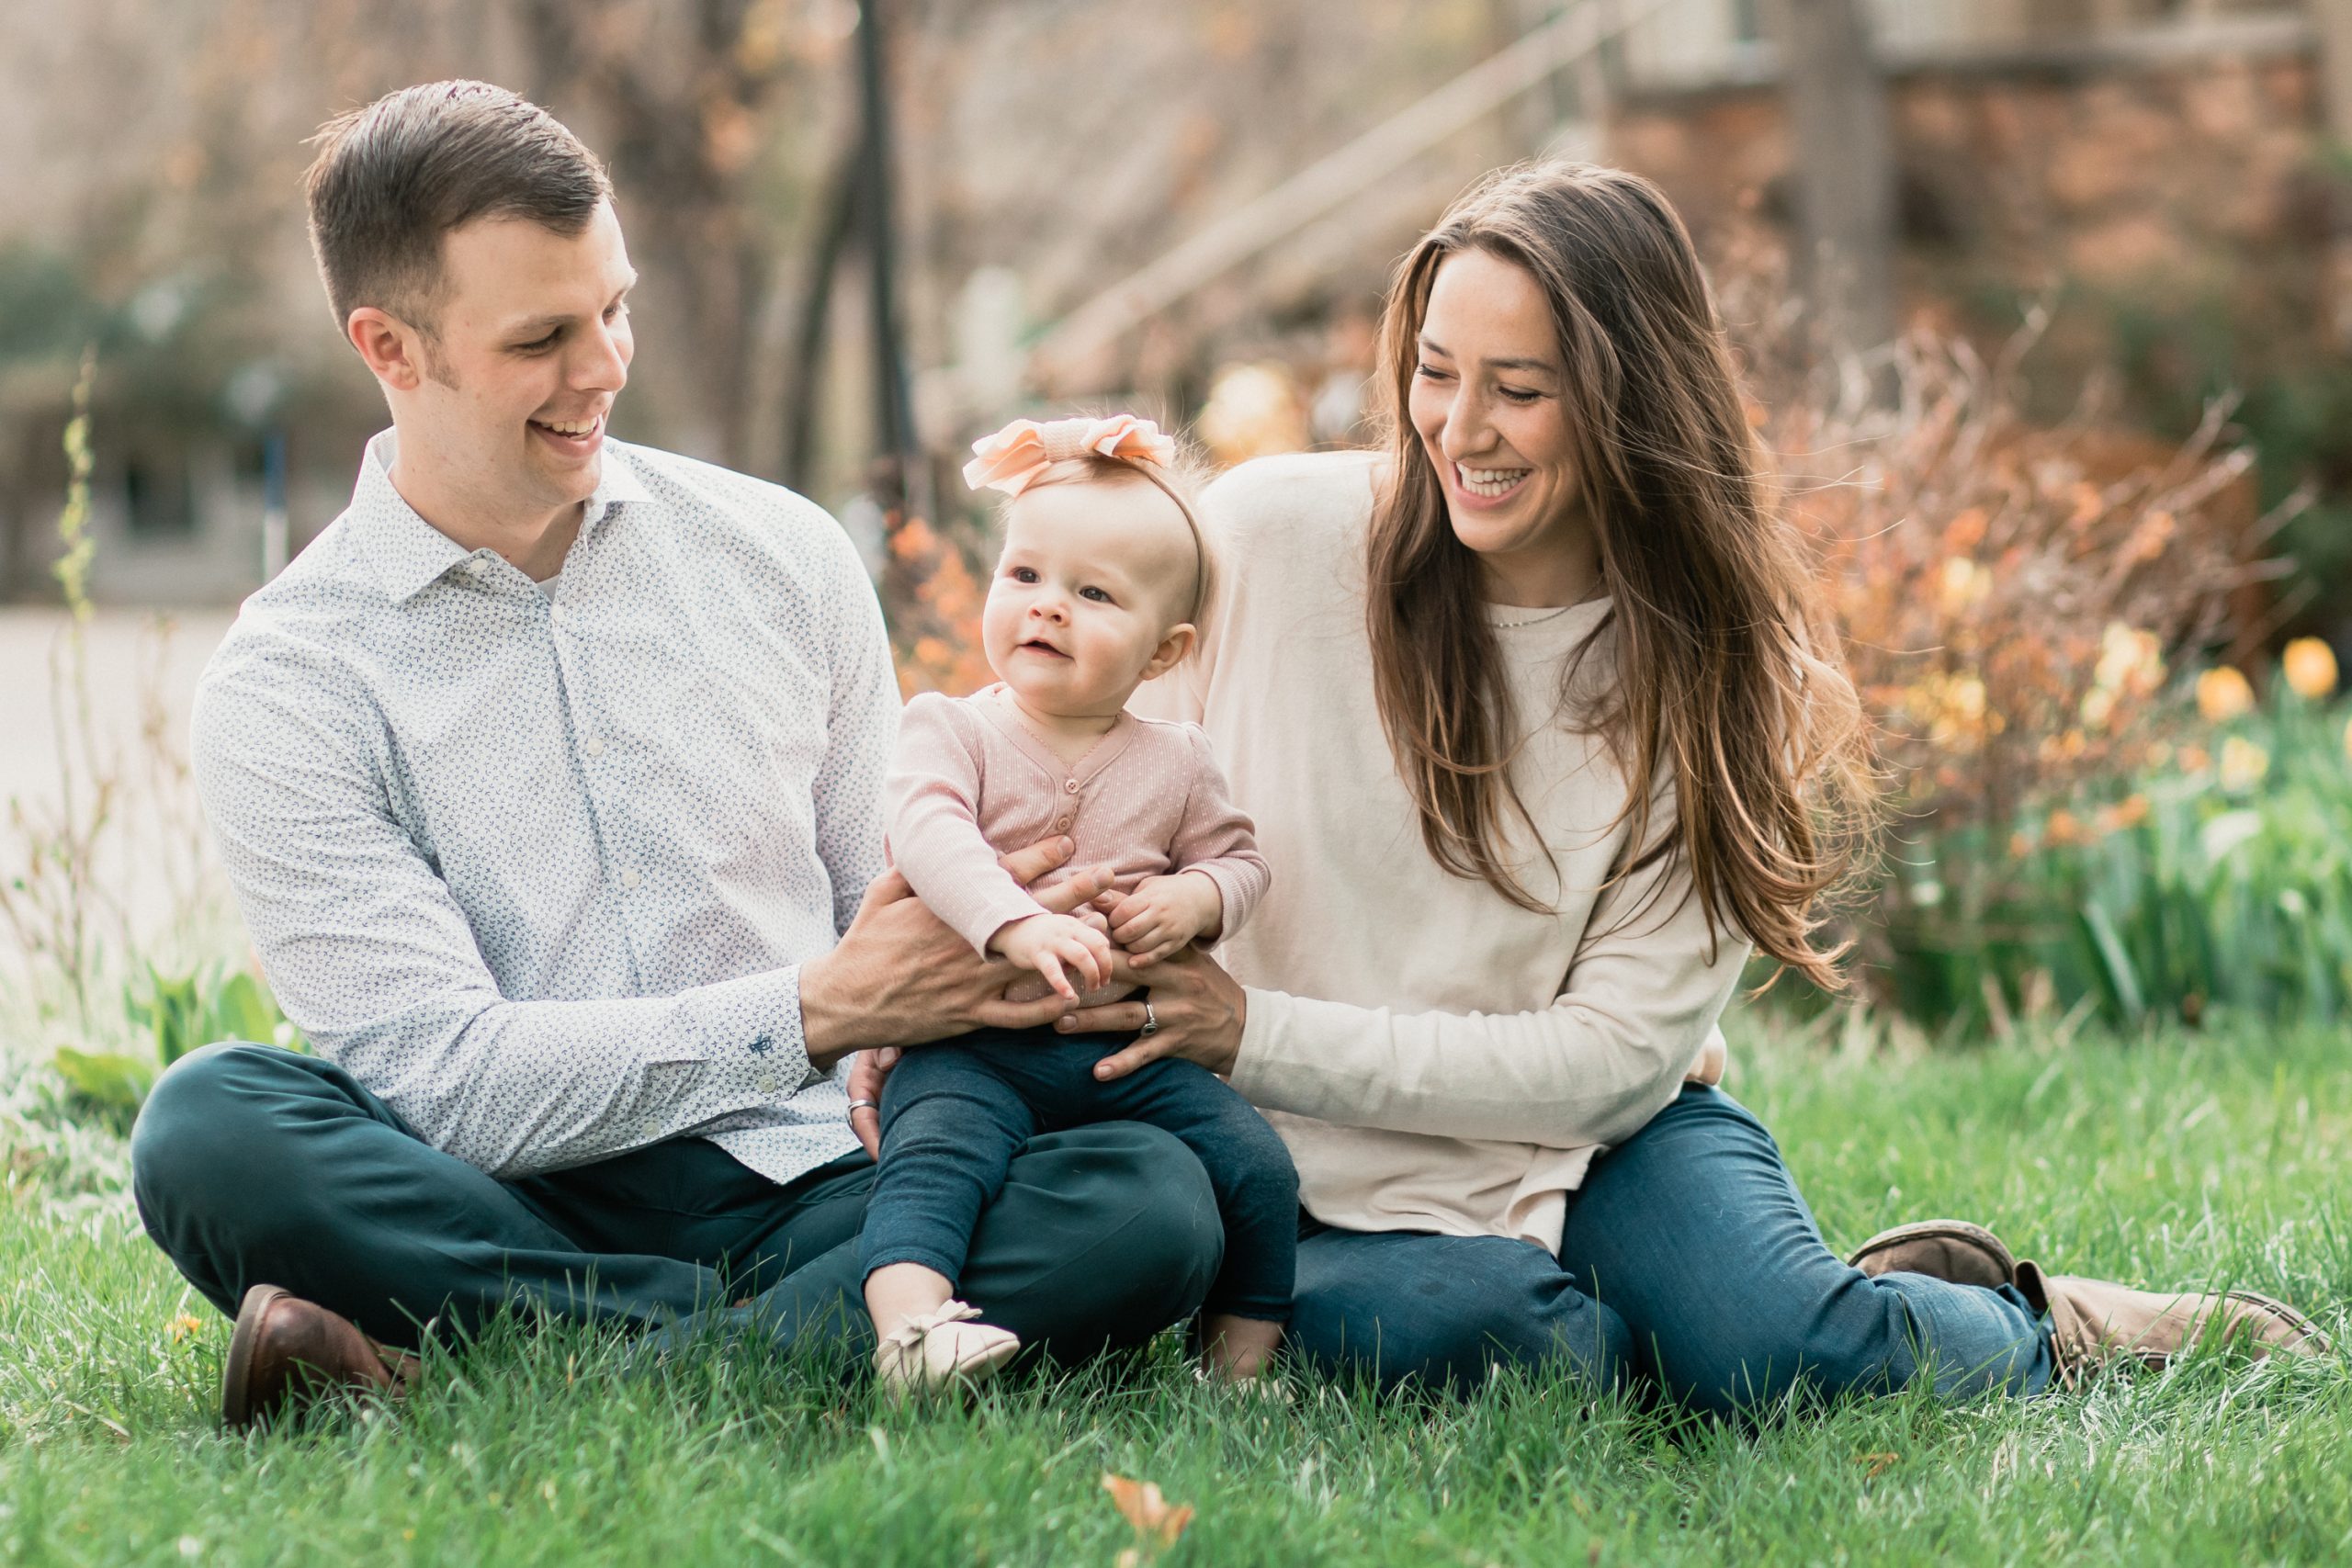 mom and dad smile at baby girl while all three sit on green grass